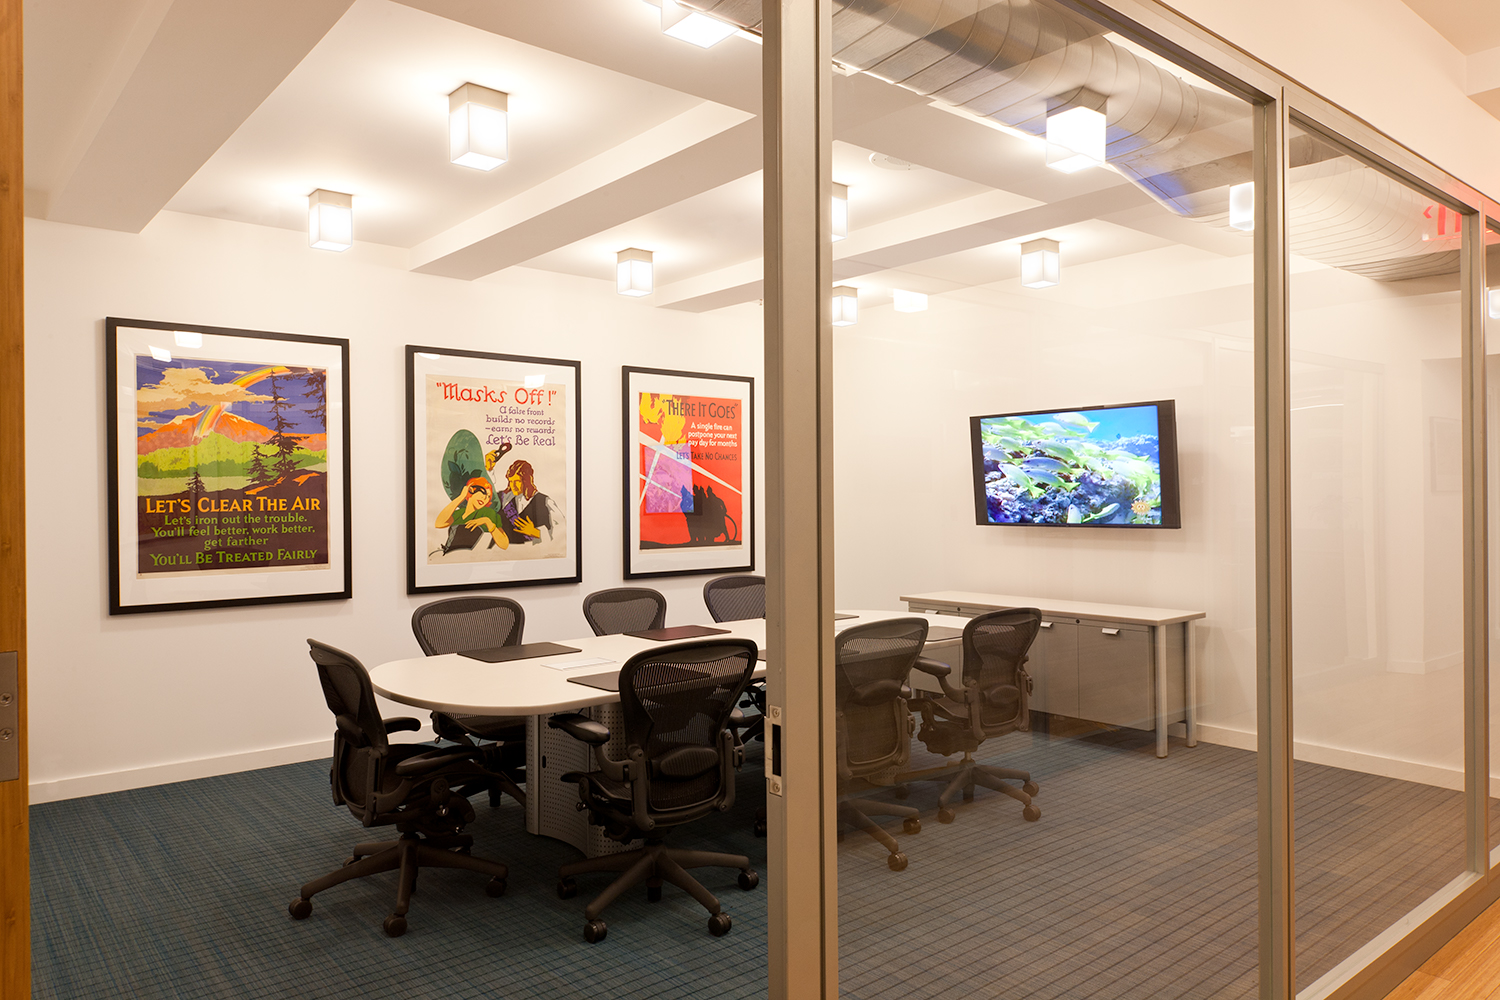 These custom light fixtures are clean, rectangular downlights for a sophisticated office conference room.